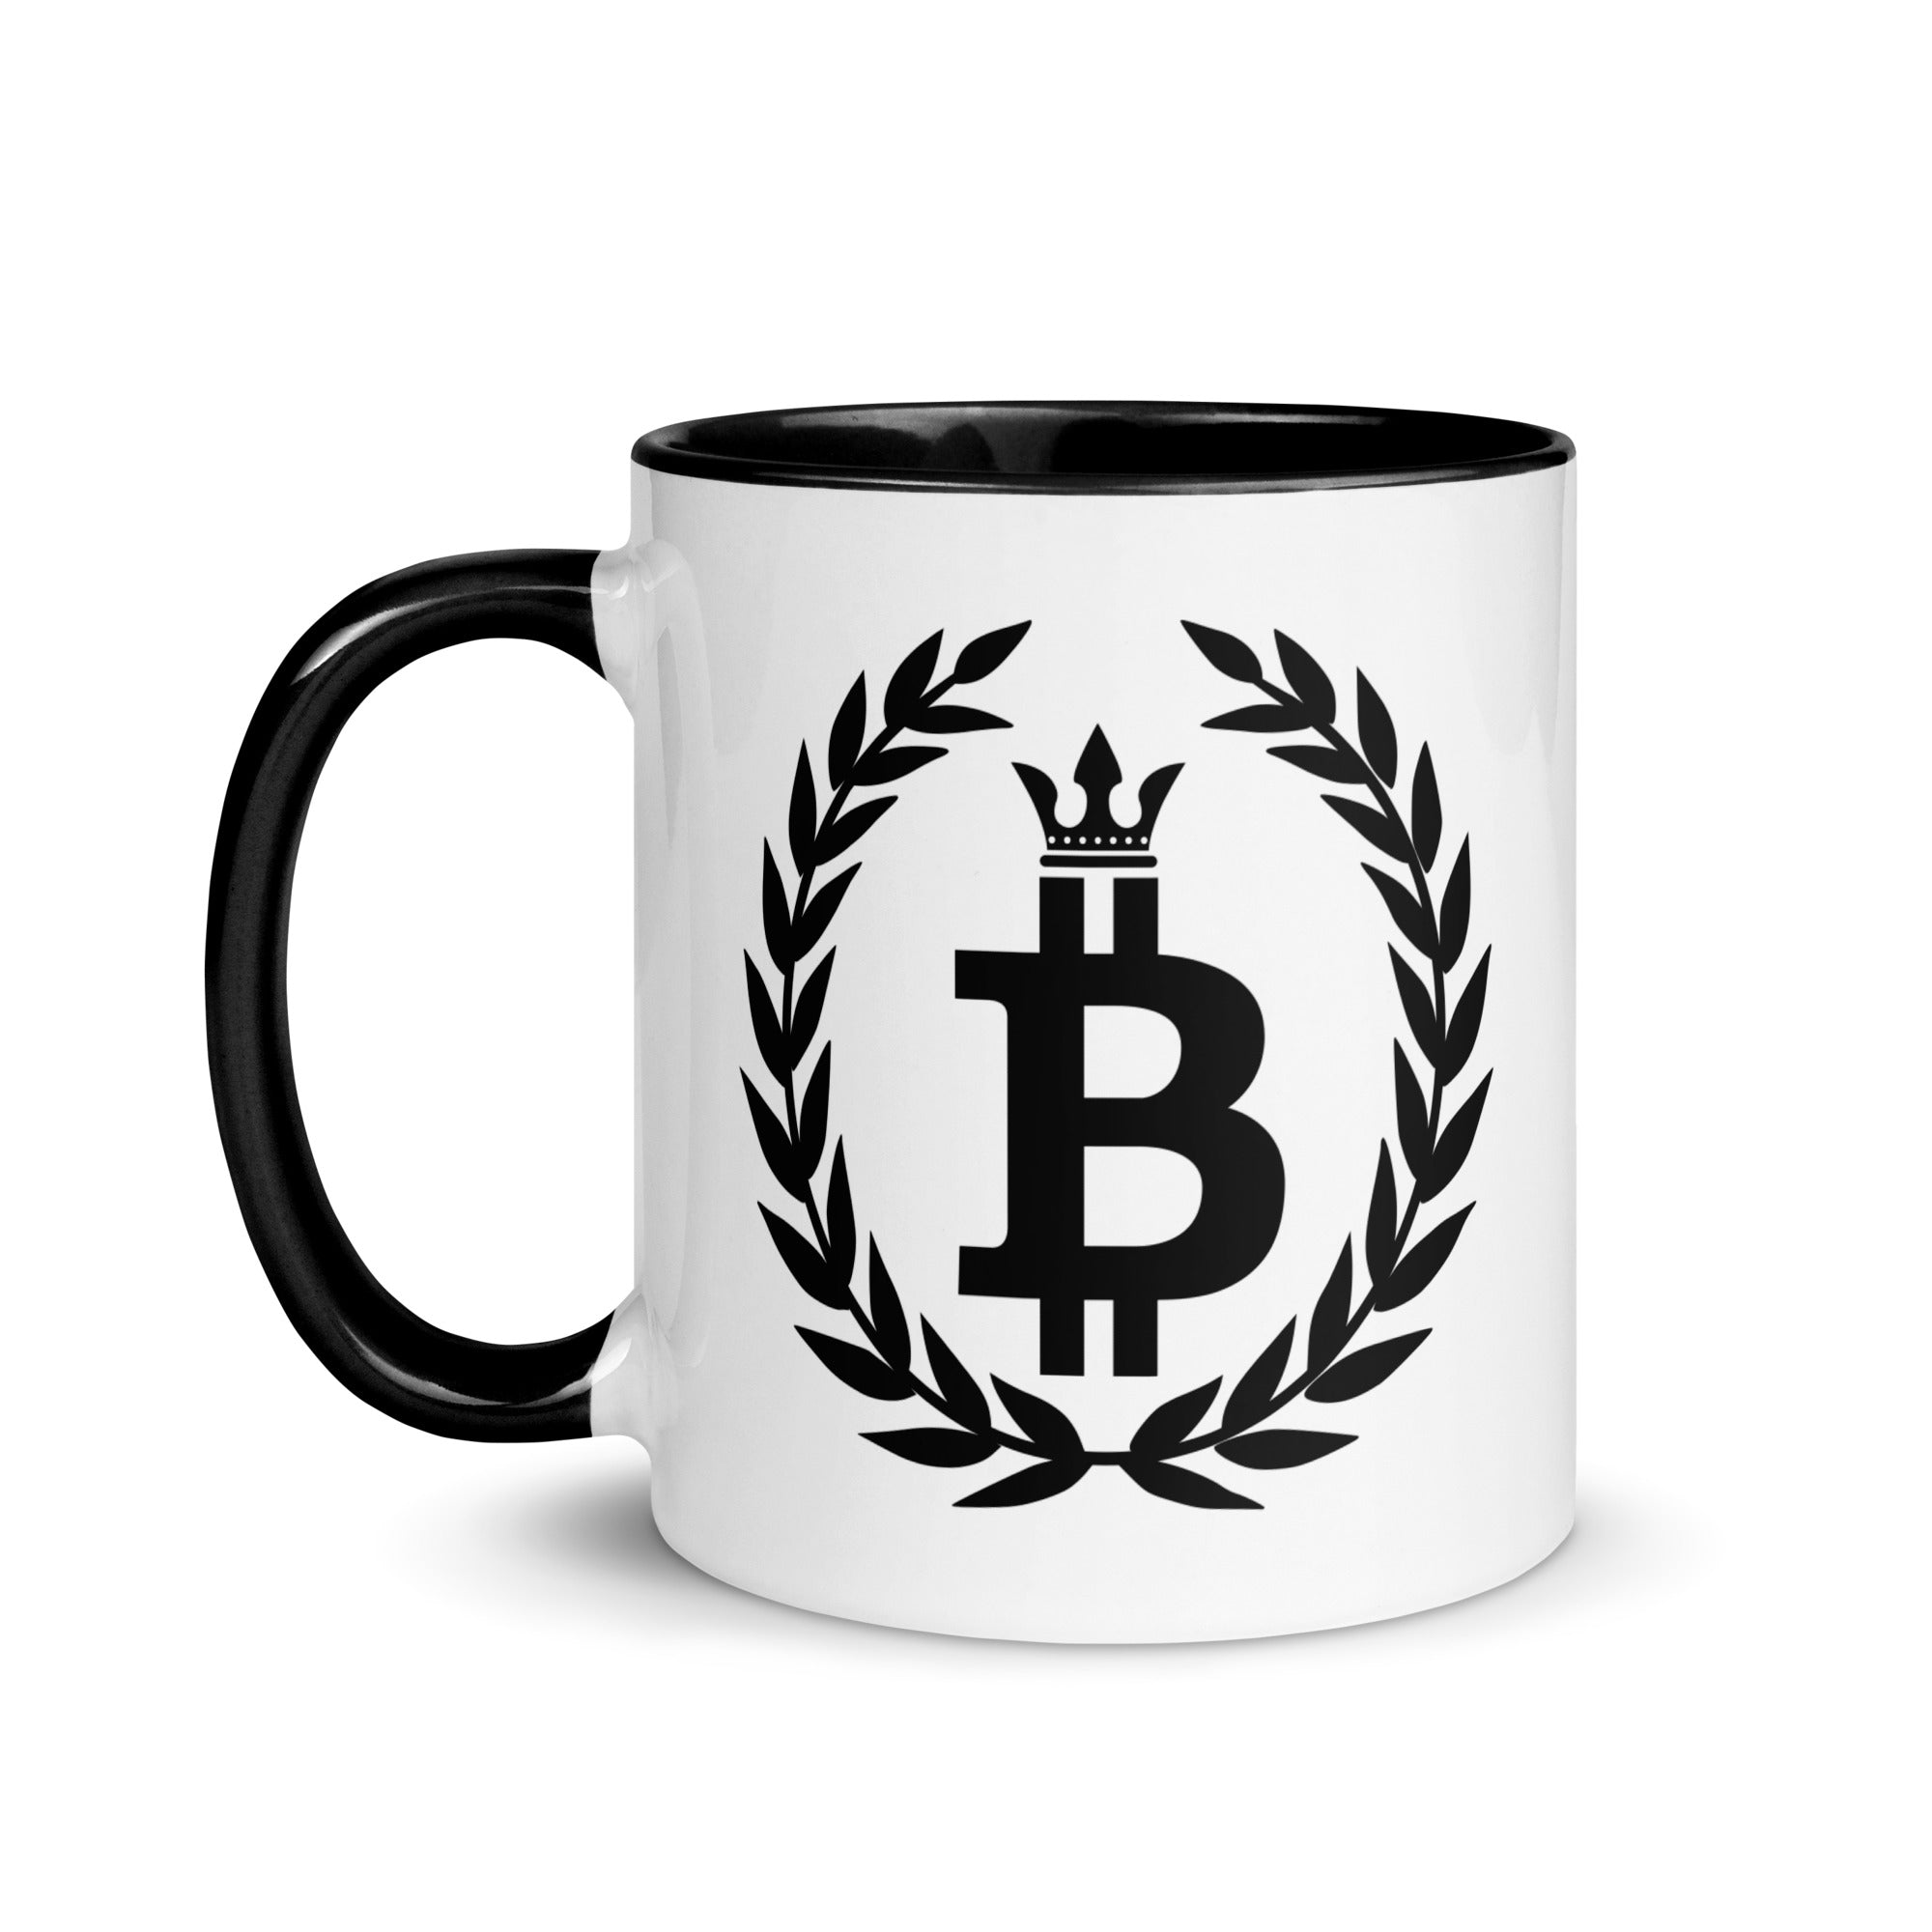 Bitcoin Gift Ideas - Our Bitcoin Dominance Mug features an epic Bitcoin emblem on a white mug with black interior and handle. Left handle view. 